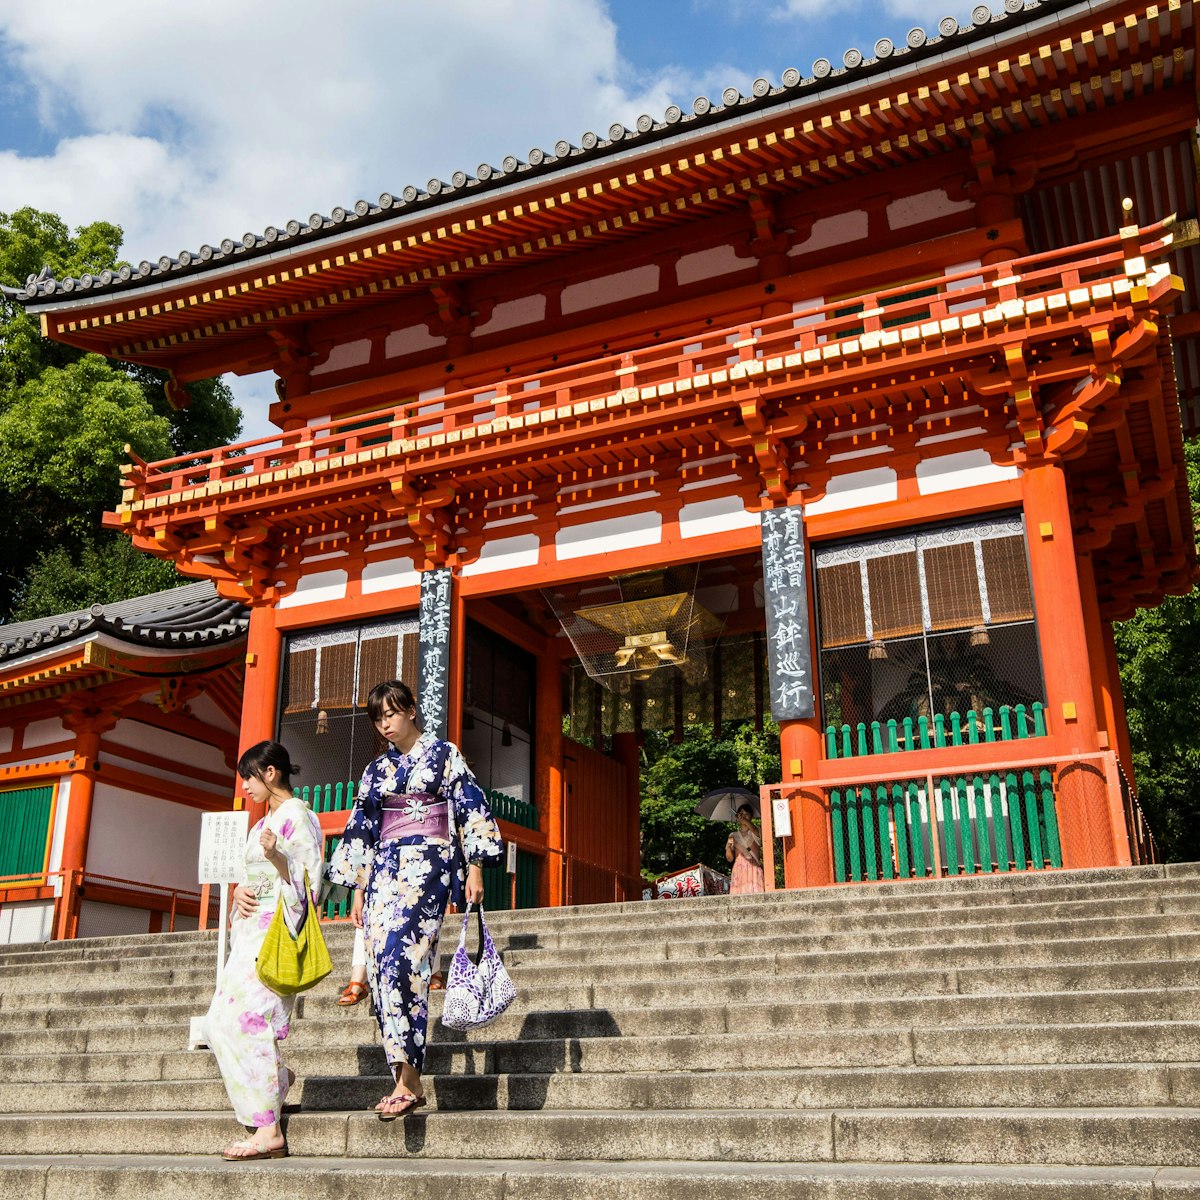 KYOTO, JAPAN - 2016/07/19: Yasaka Shrine or in Japanese Yasaka Jinja was once called Gion Shrine includes several buildings, a main hall and a stage on which kendo and noh performances are held.   The shrine was constructed in the year 656 and was under imperial patronage during the early Heian period.   In the year 869 the mikoshi portable shrines or divine palanquins of Gion Shrine were paraded through Kyoto to help ward off an epidemic  which was the beginning of the Gion Matsuri, an annual festival which has become an intangible UNESCO world heritage artifact. (Photo by John S Lander/LightRocket via Getty Images)